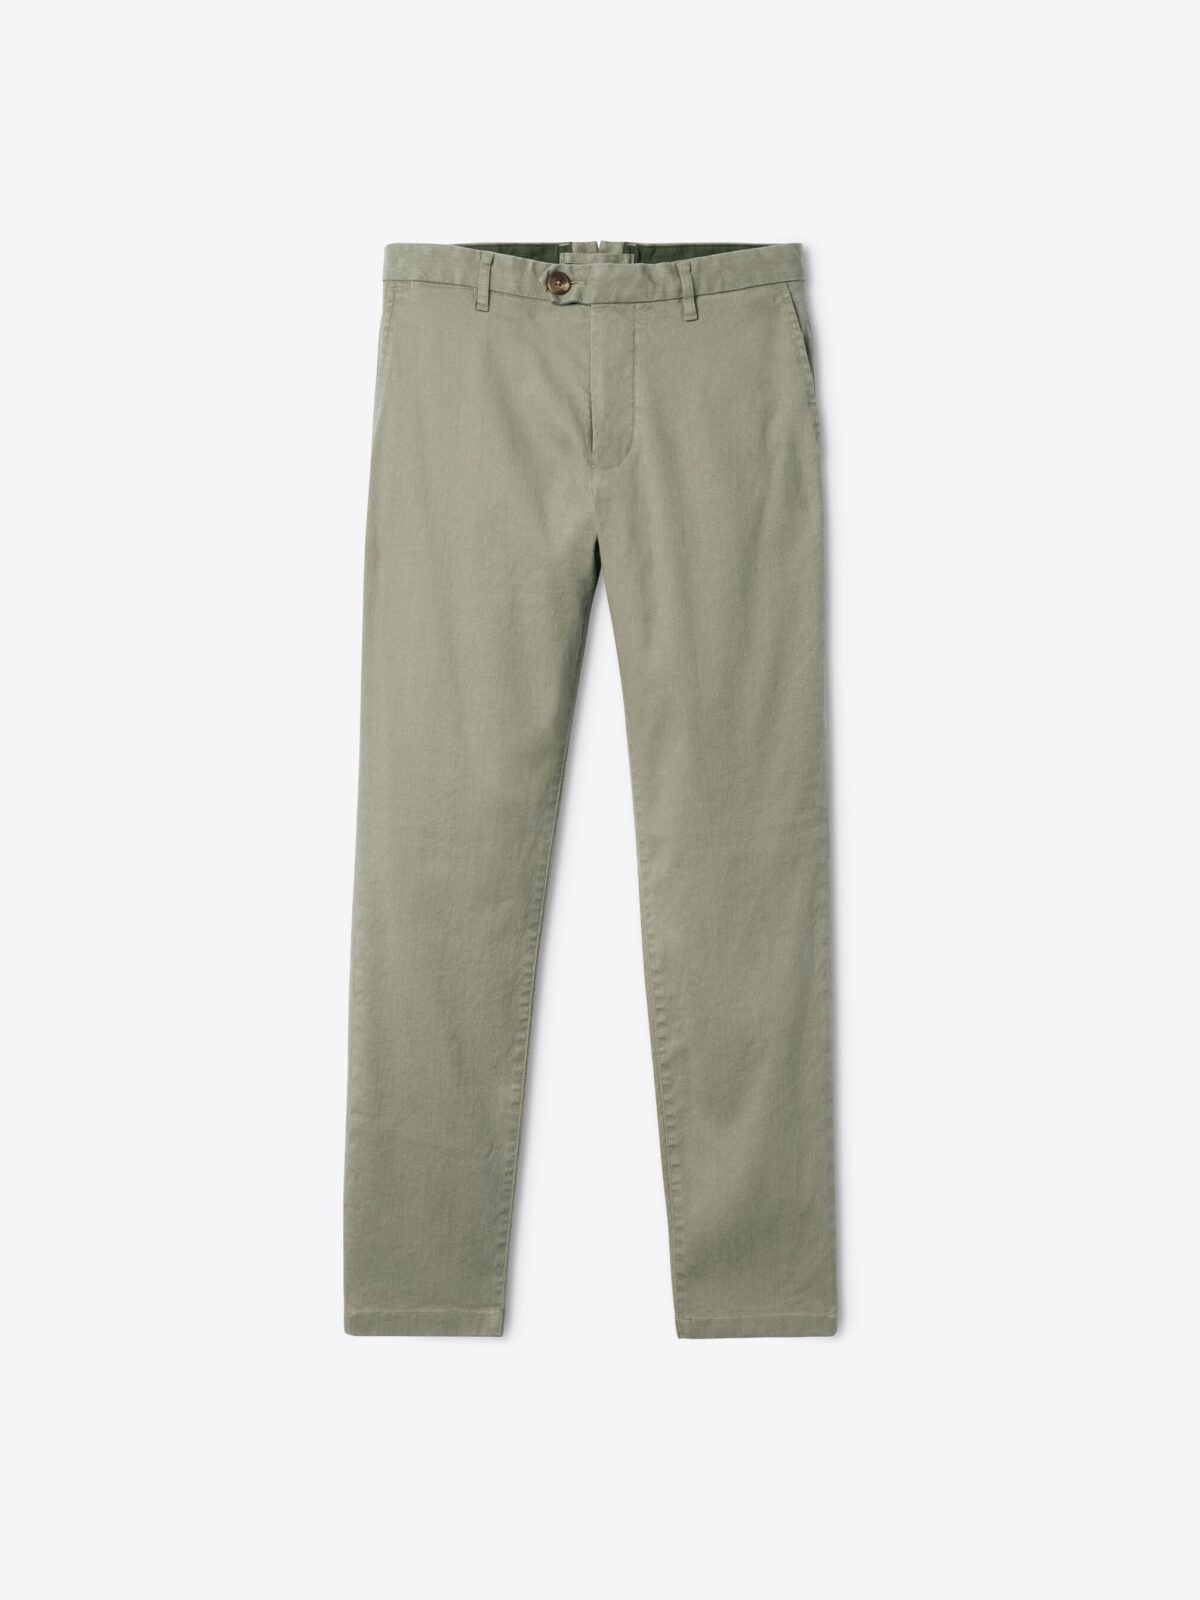 Bergamo Faded Fatigue Cotton and Linen Stretch Chino - Custom Fit Pants